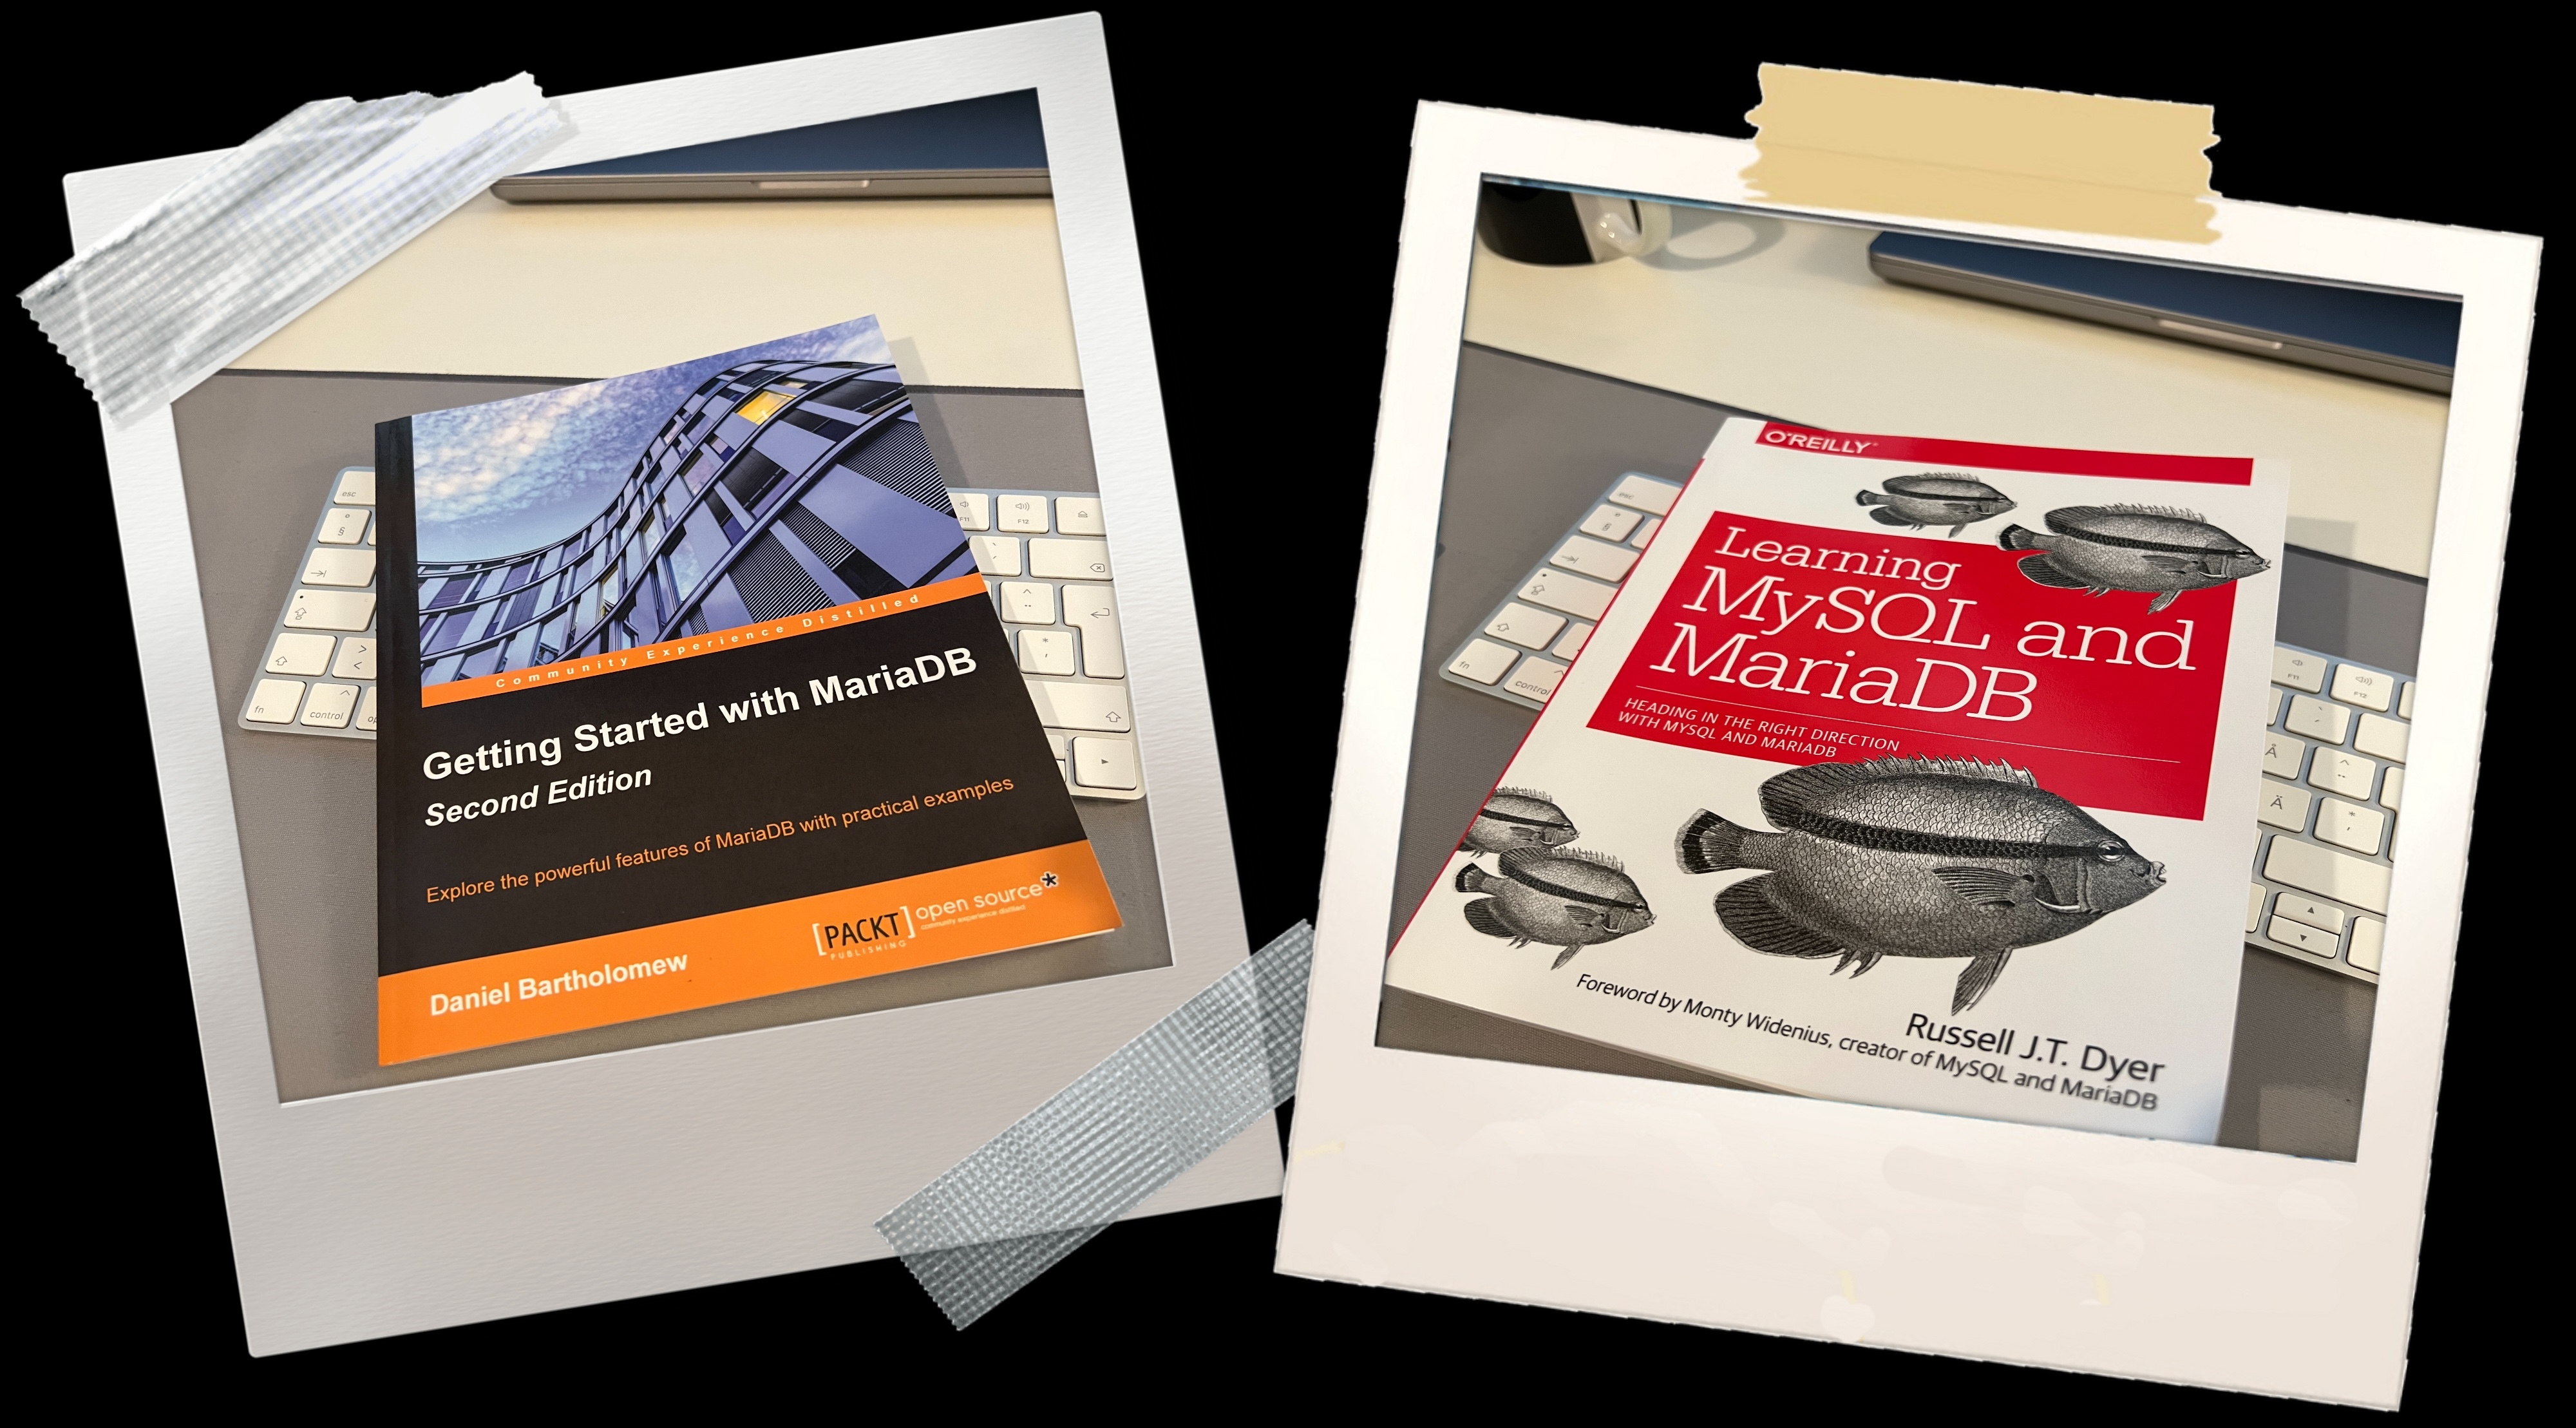 My favorite books about MariaDB